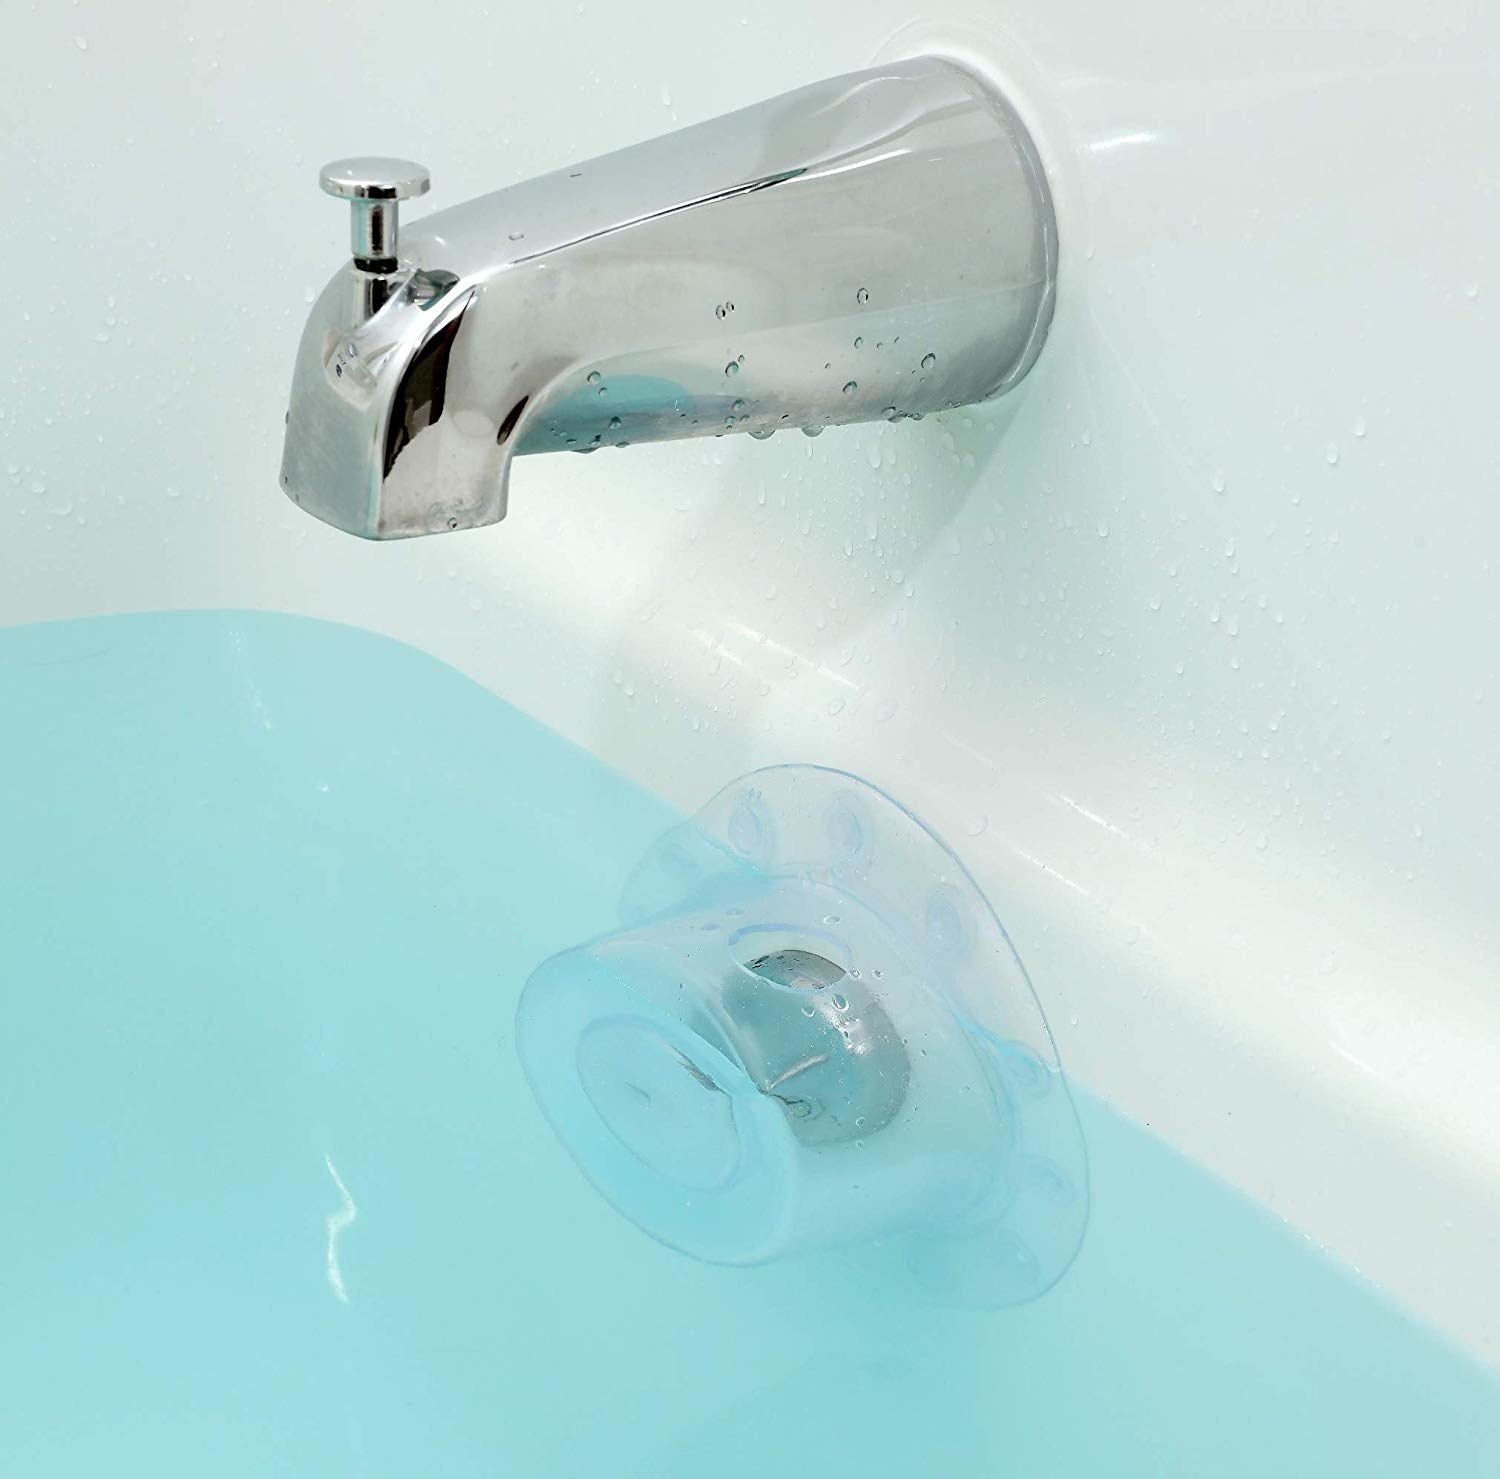 The transparent cover placed over a bathtub drain, preventing water from draining